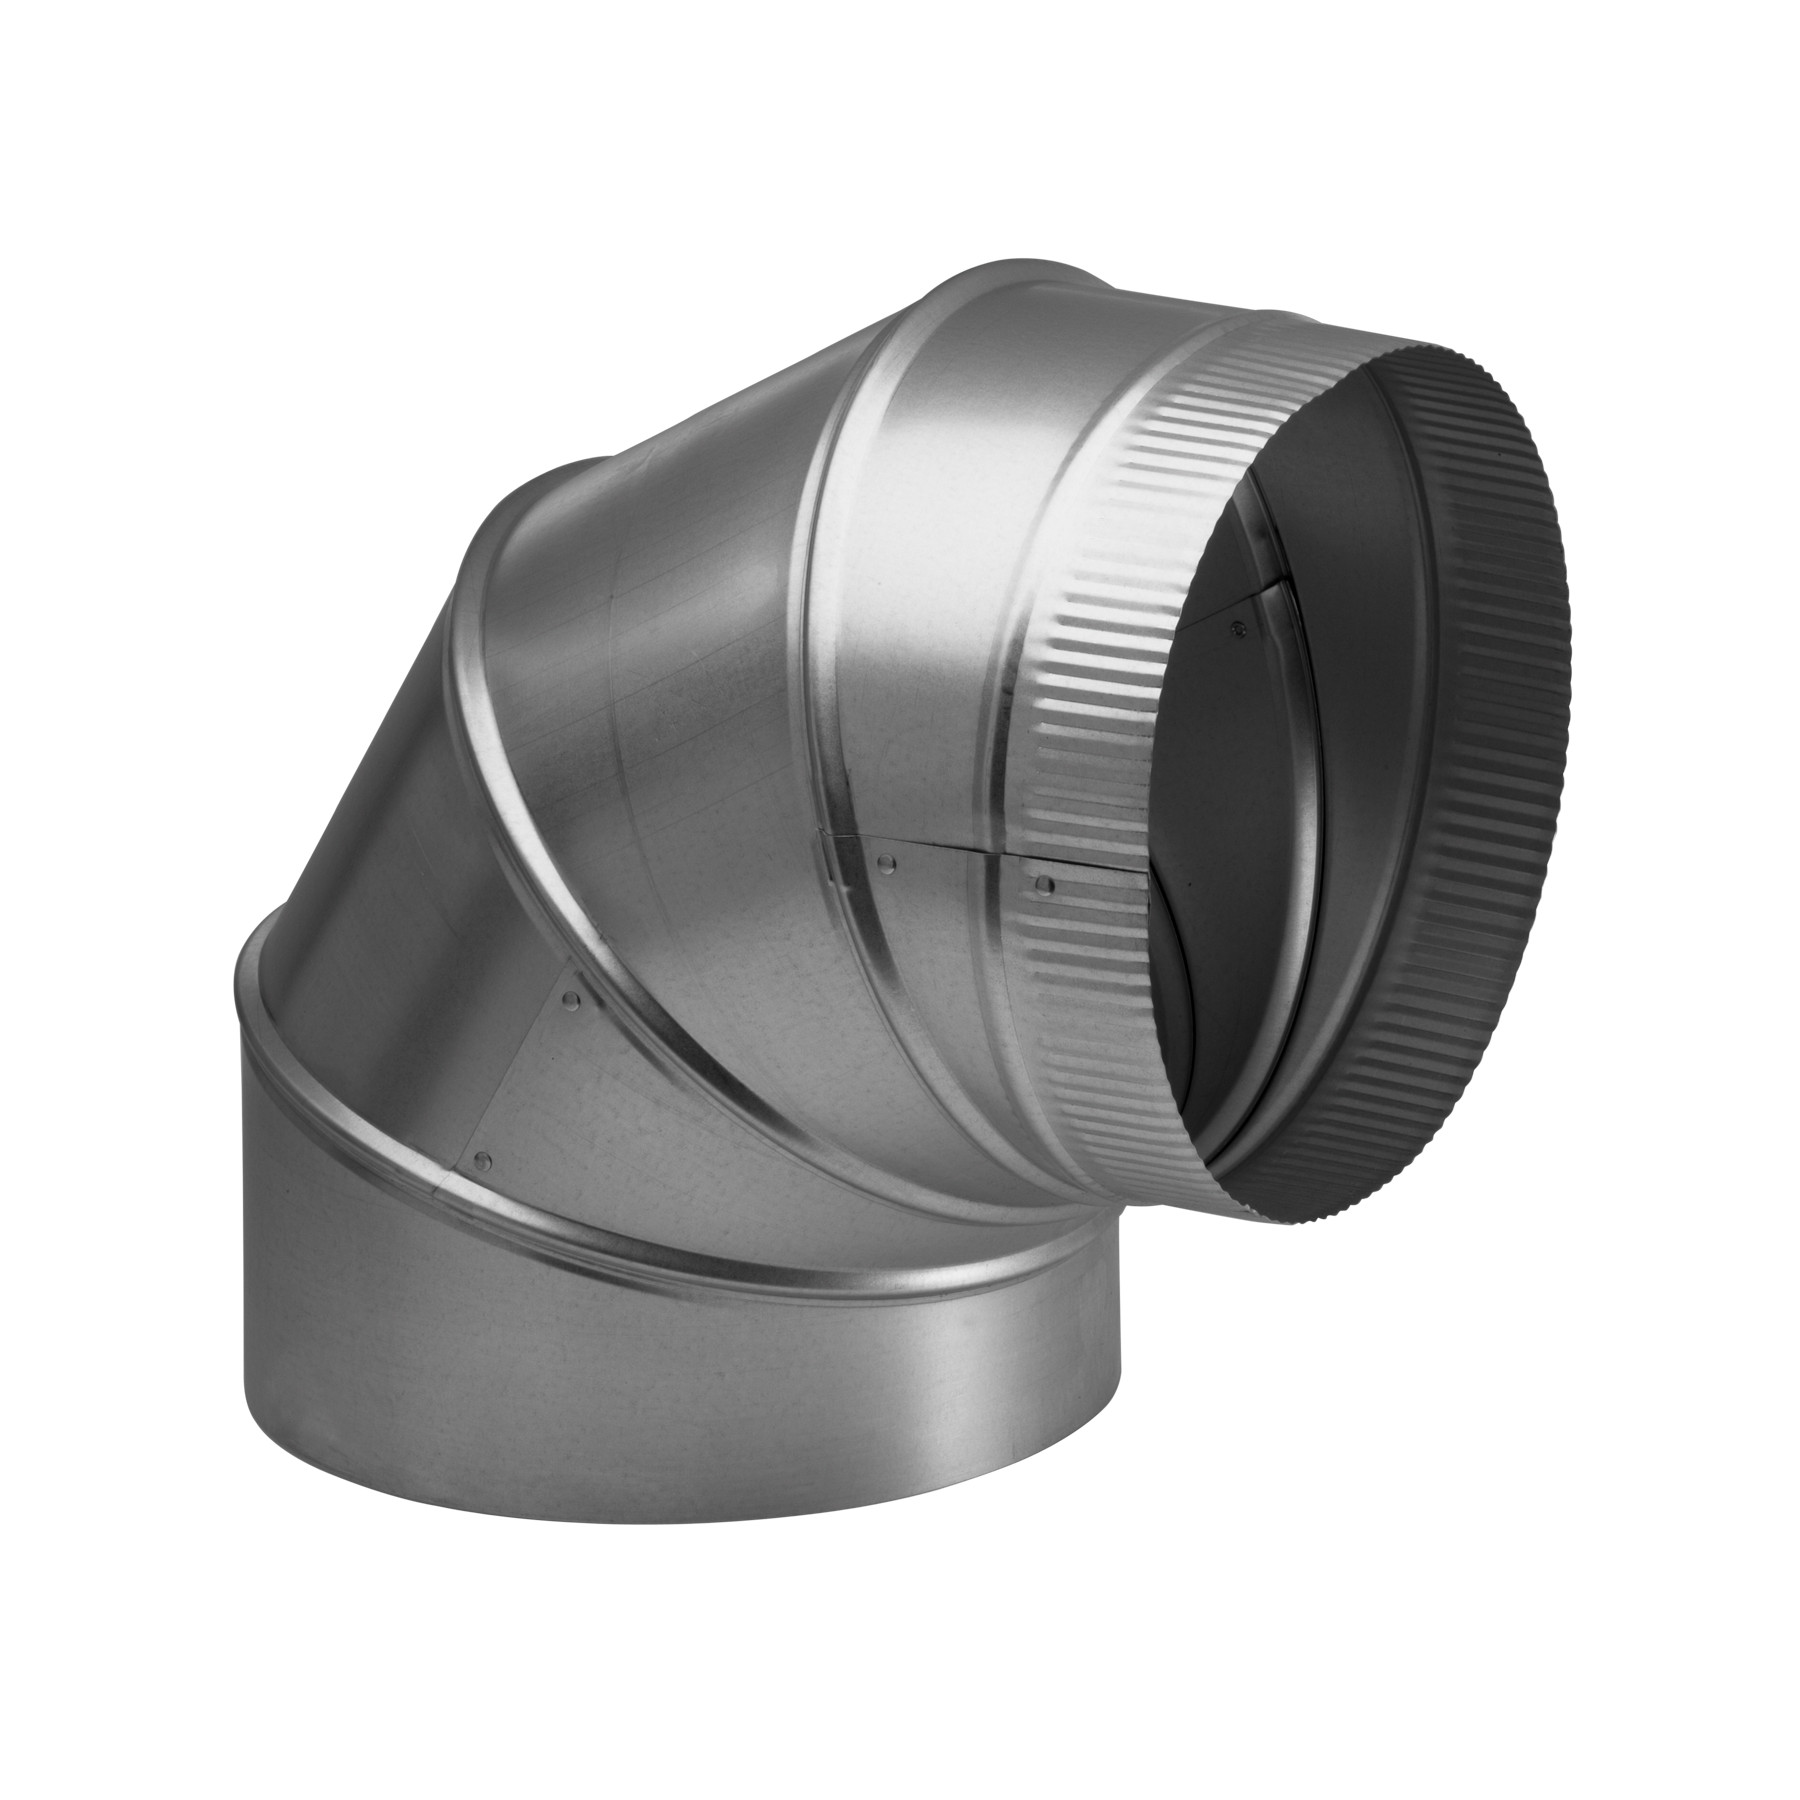 DISCONTINUED: 7-Inch Round Elbow Duct for Range Hoods and Bath Ventilation Fans